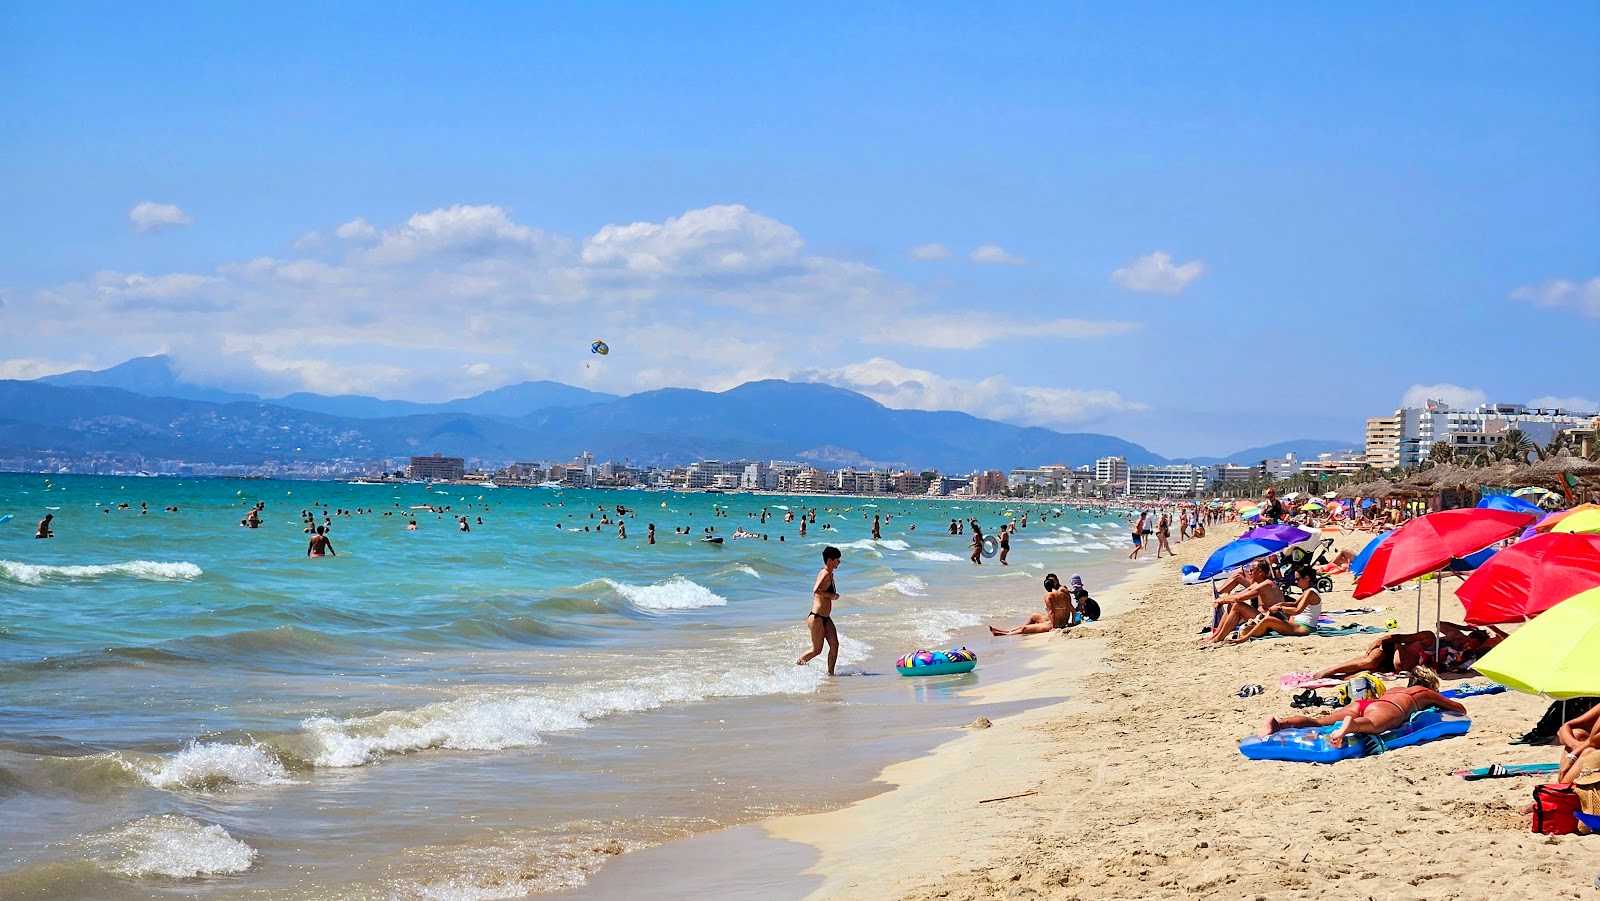 Photo of Platja de s'Arenal (Palma) with bright sand surface